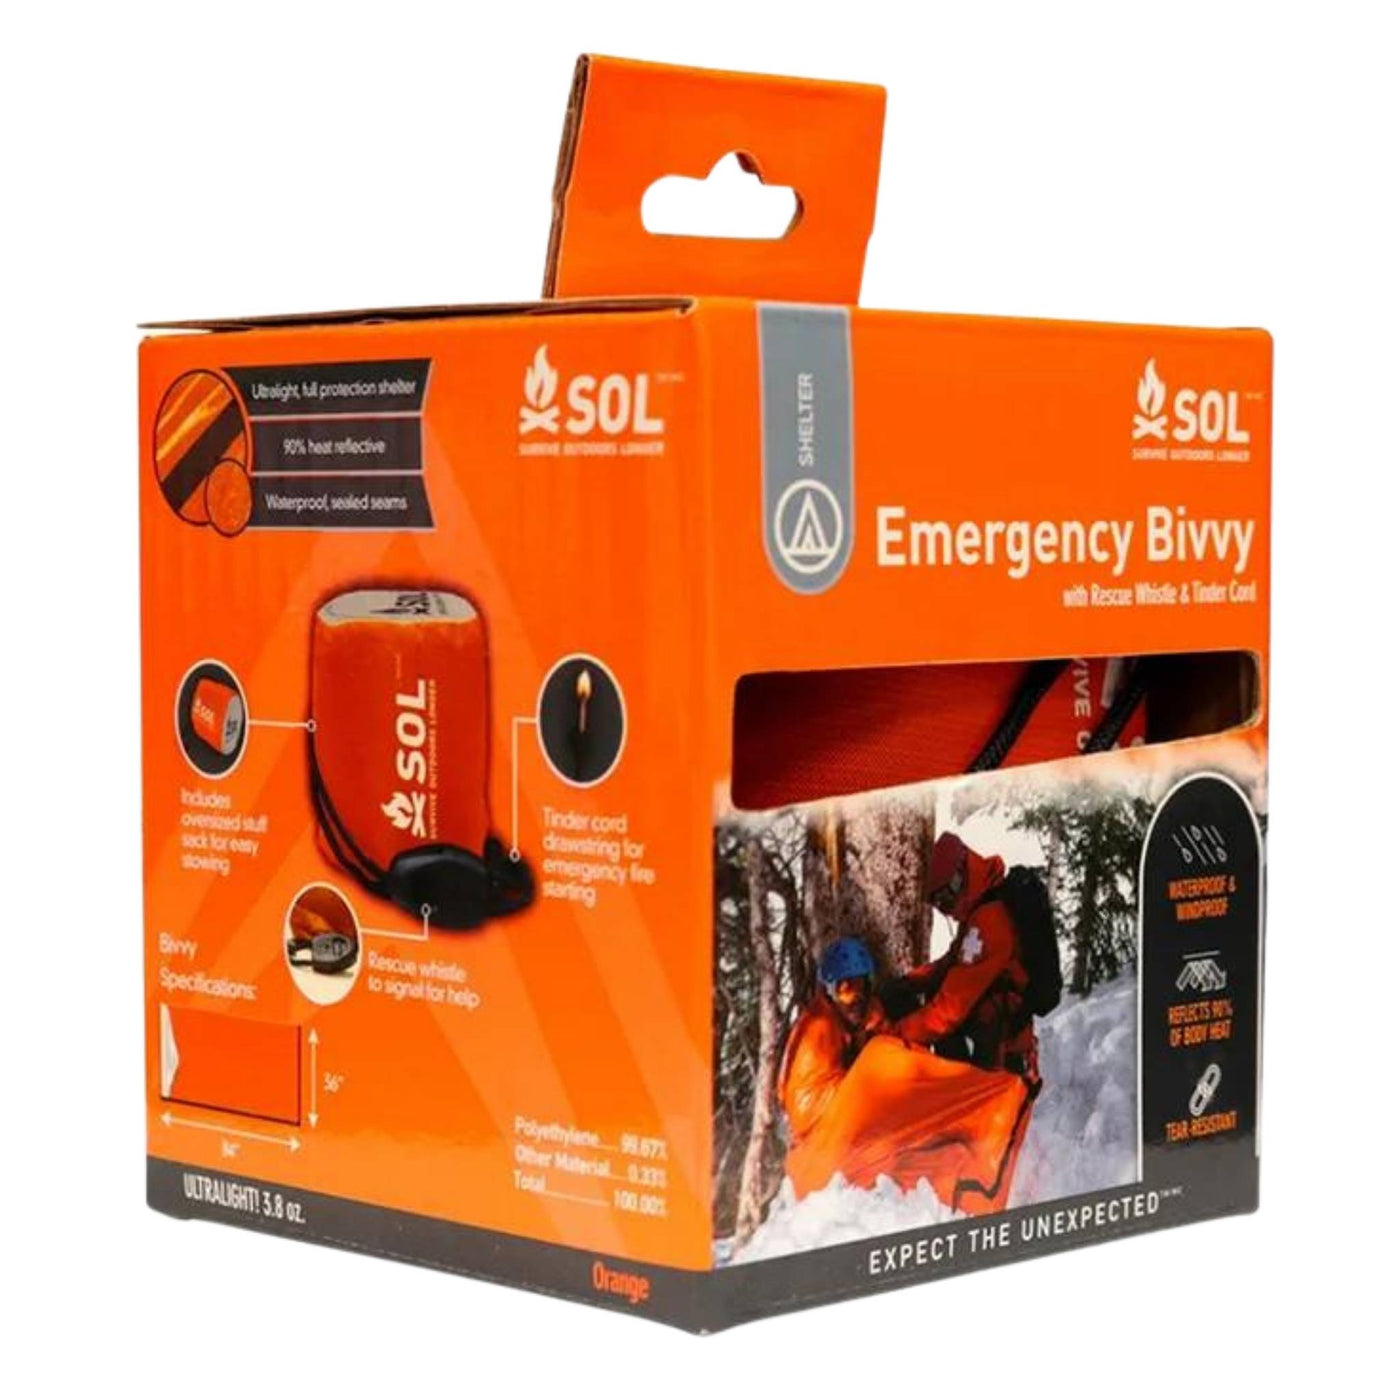 SOL Emergency Bivvy | Backcountry Shelter | Further Faster Christchurch NZ